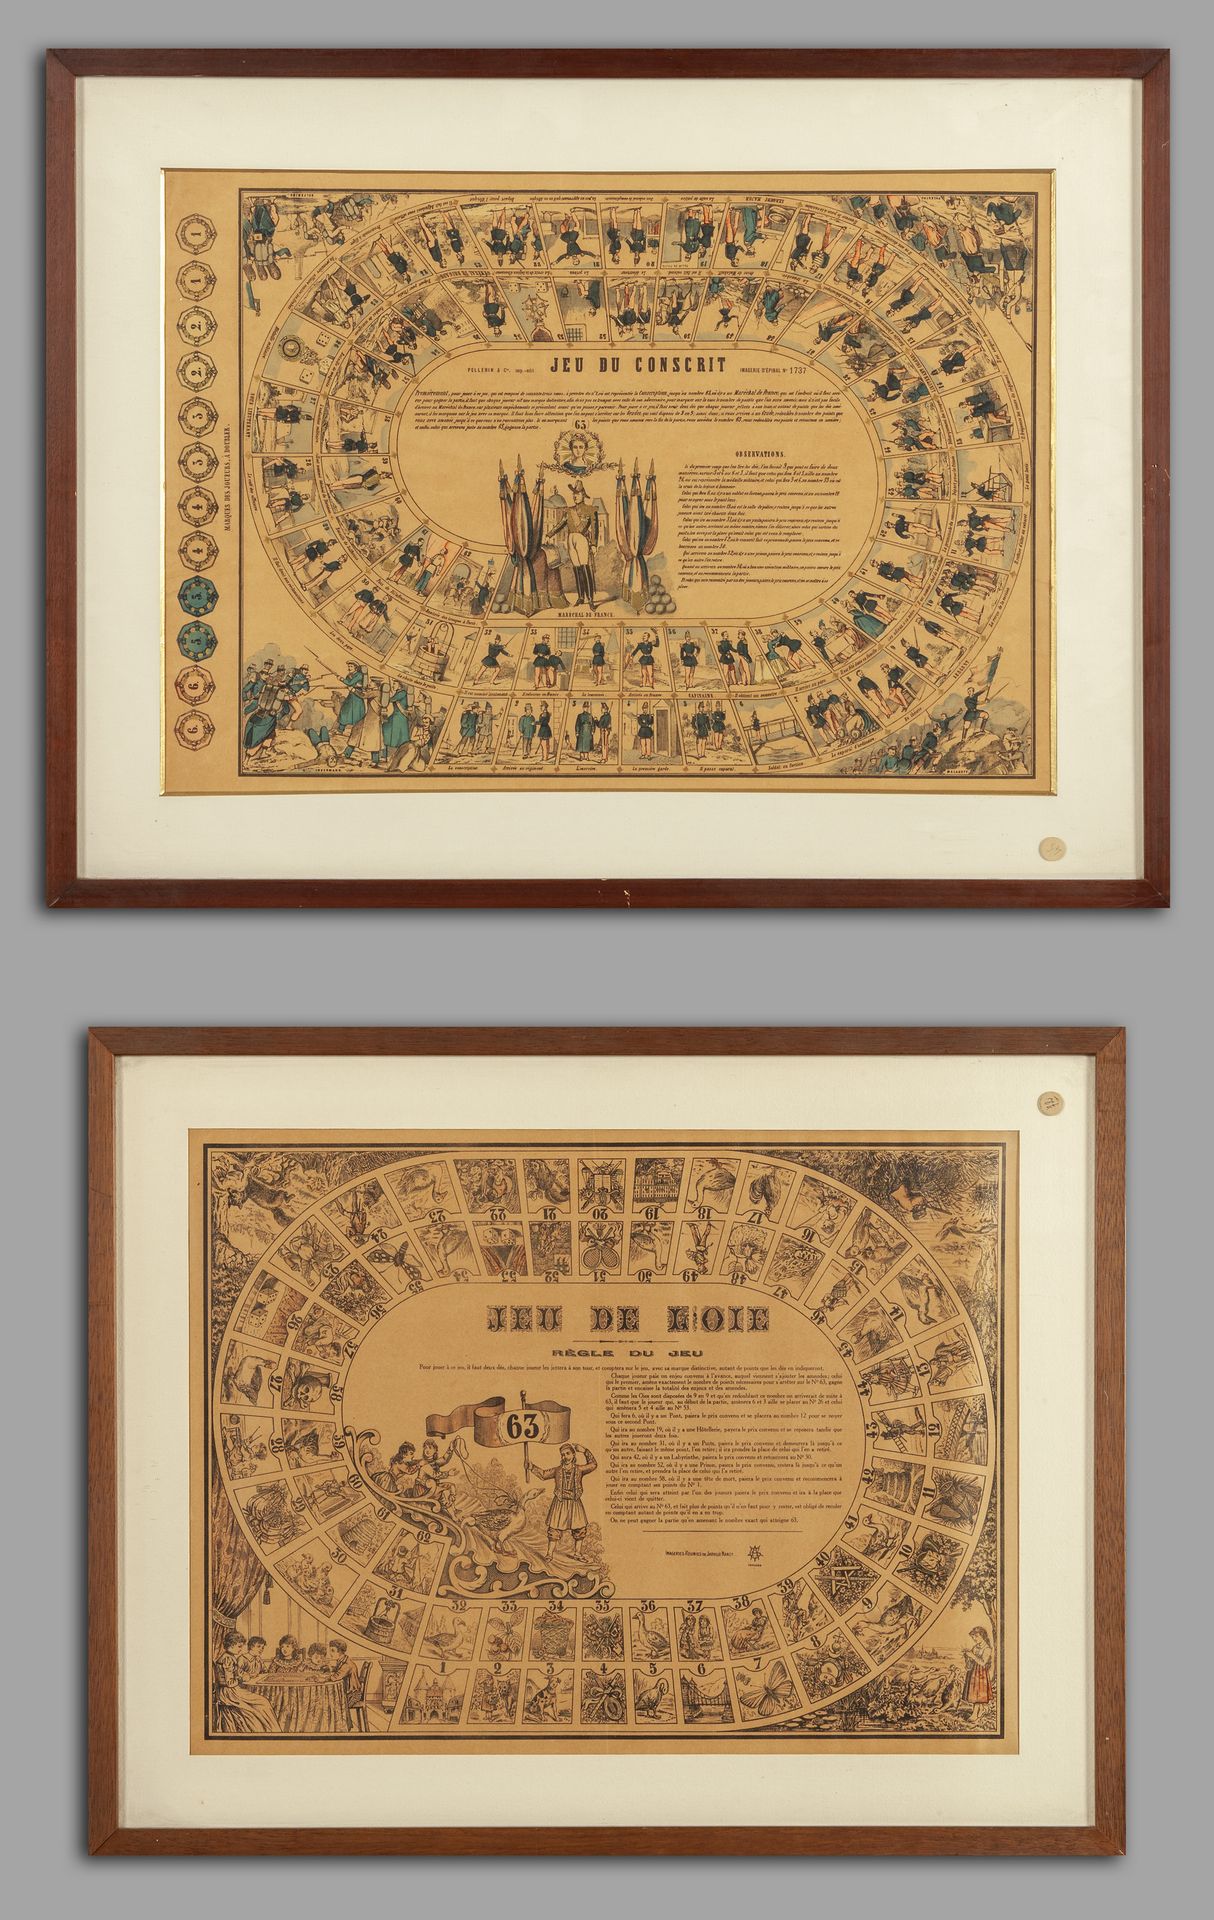 OGGETTISTICA Jeu du conscrit and Game of the Goose two engravings XIX century